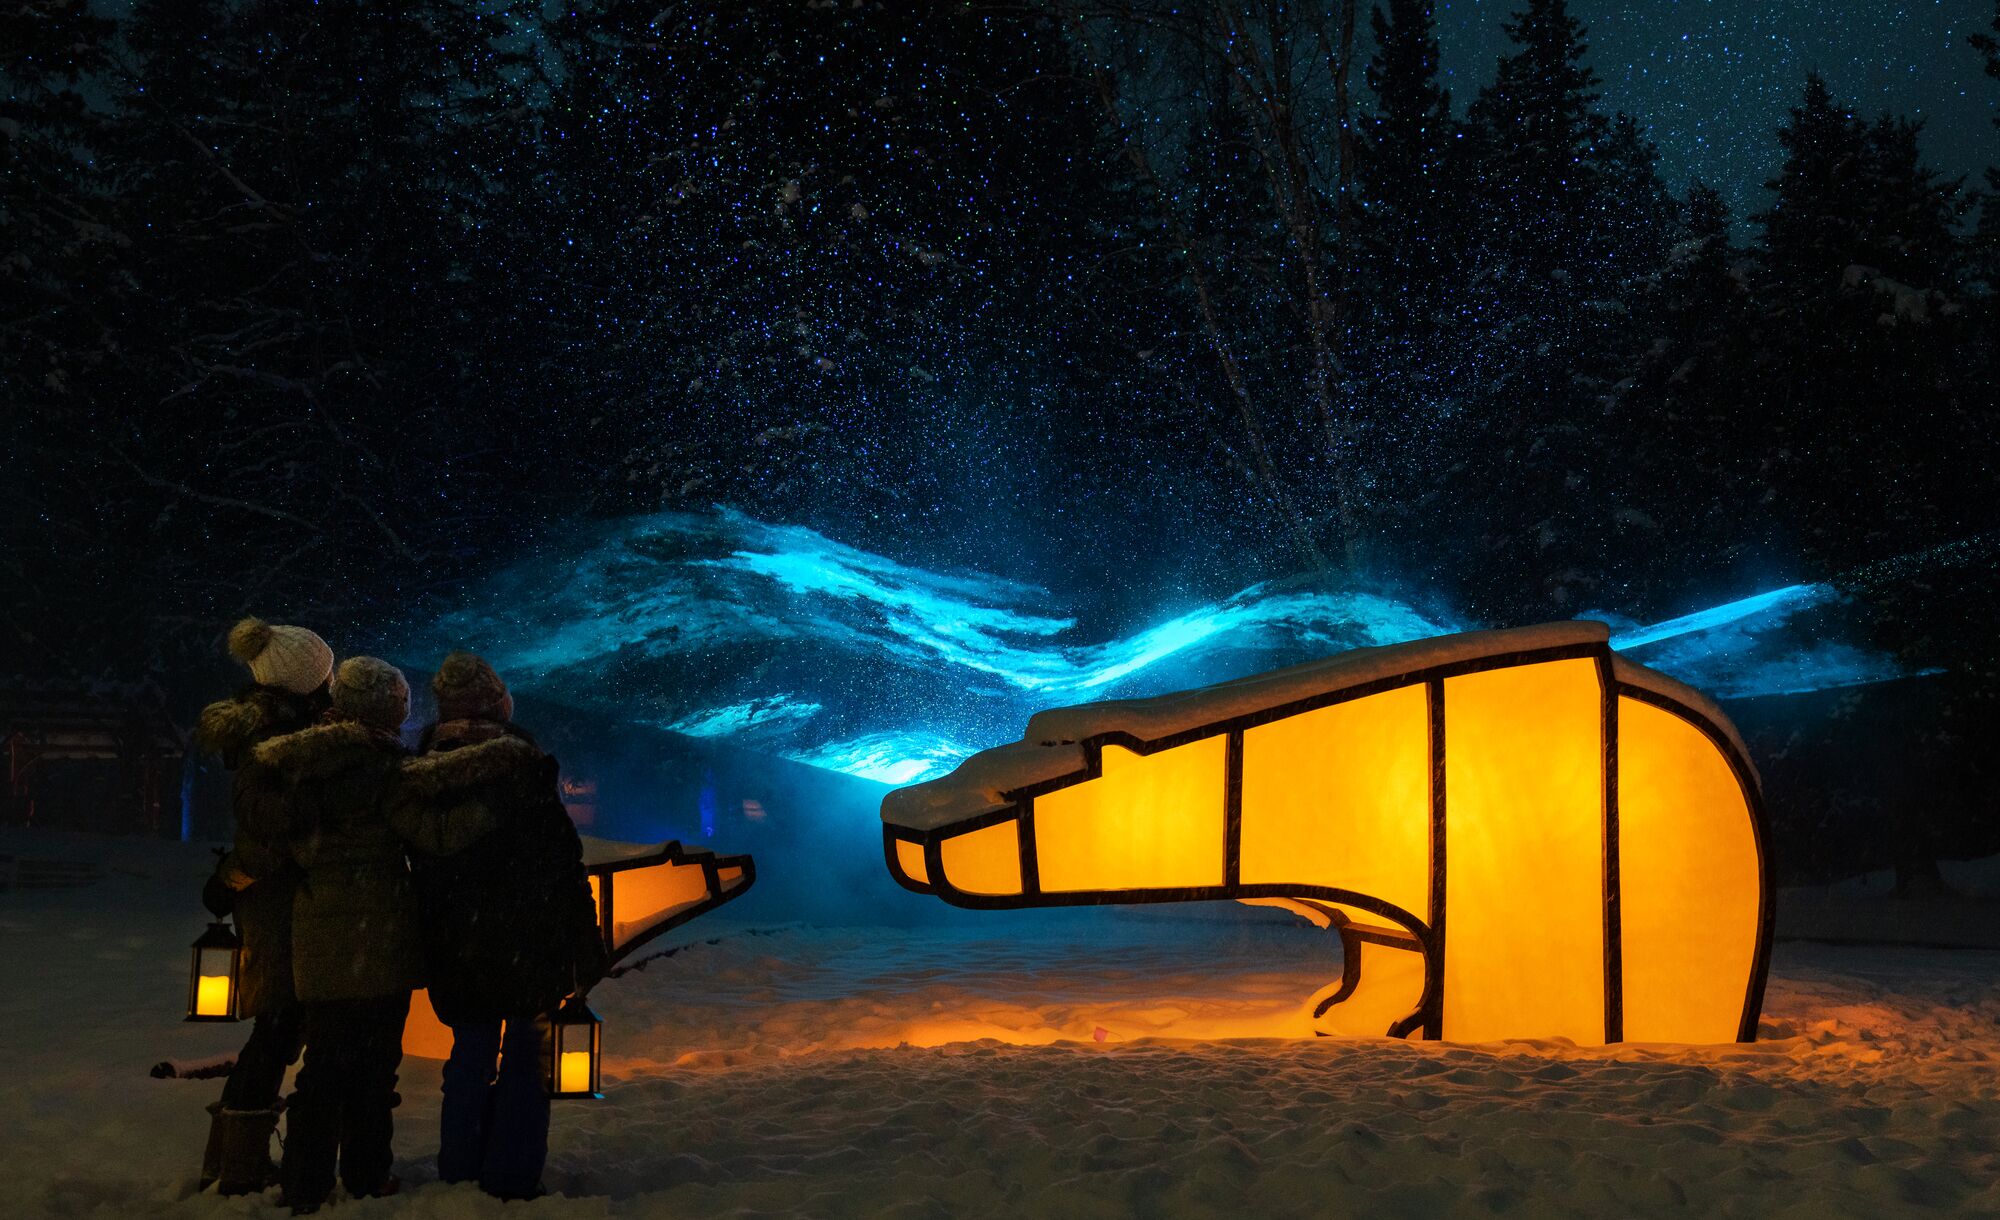 A family enjoys the In Search of Christmas Spirit event featuring light up animal sculptures on a snowy evening in Banff National Park